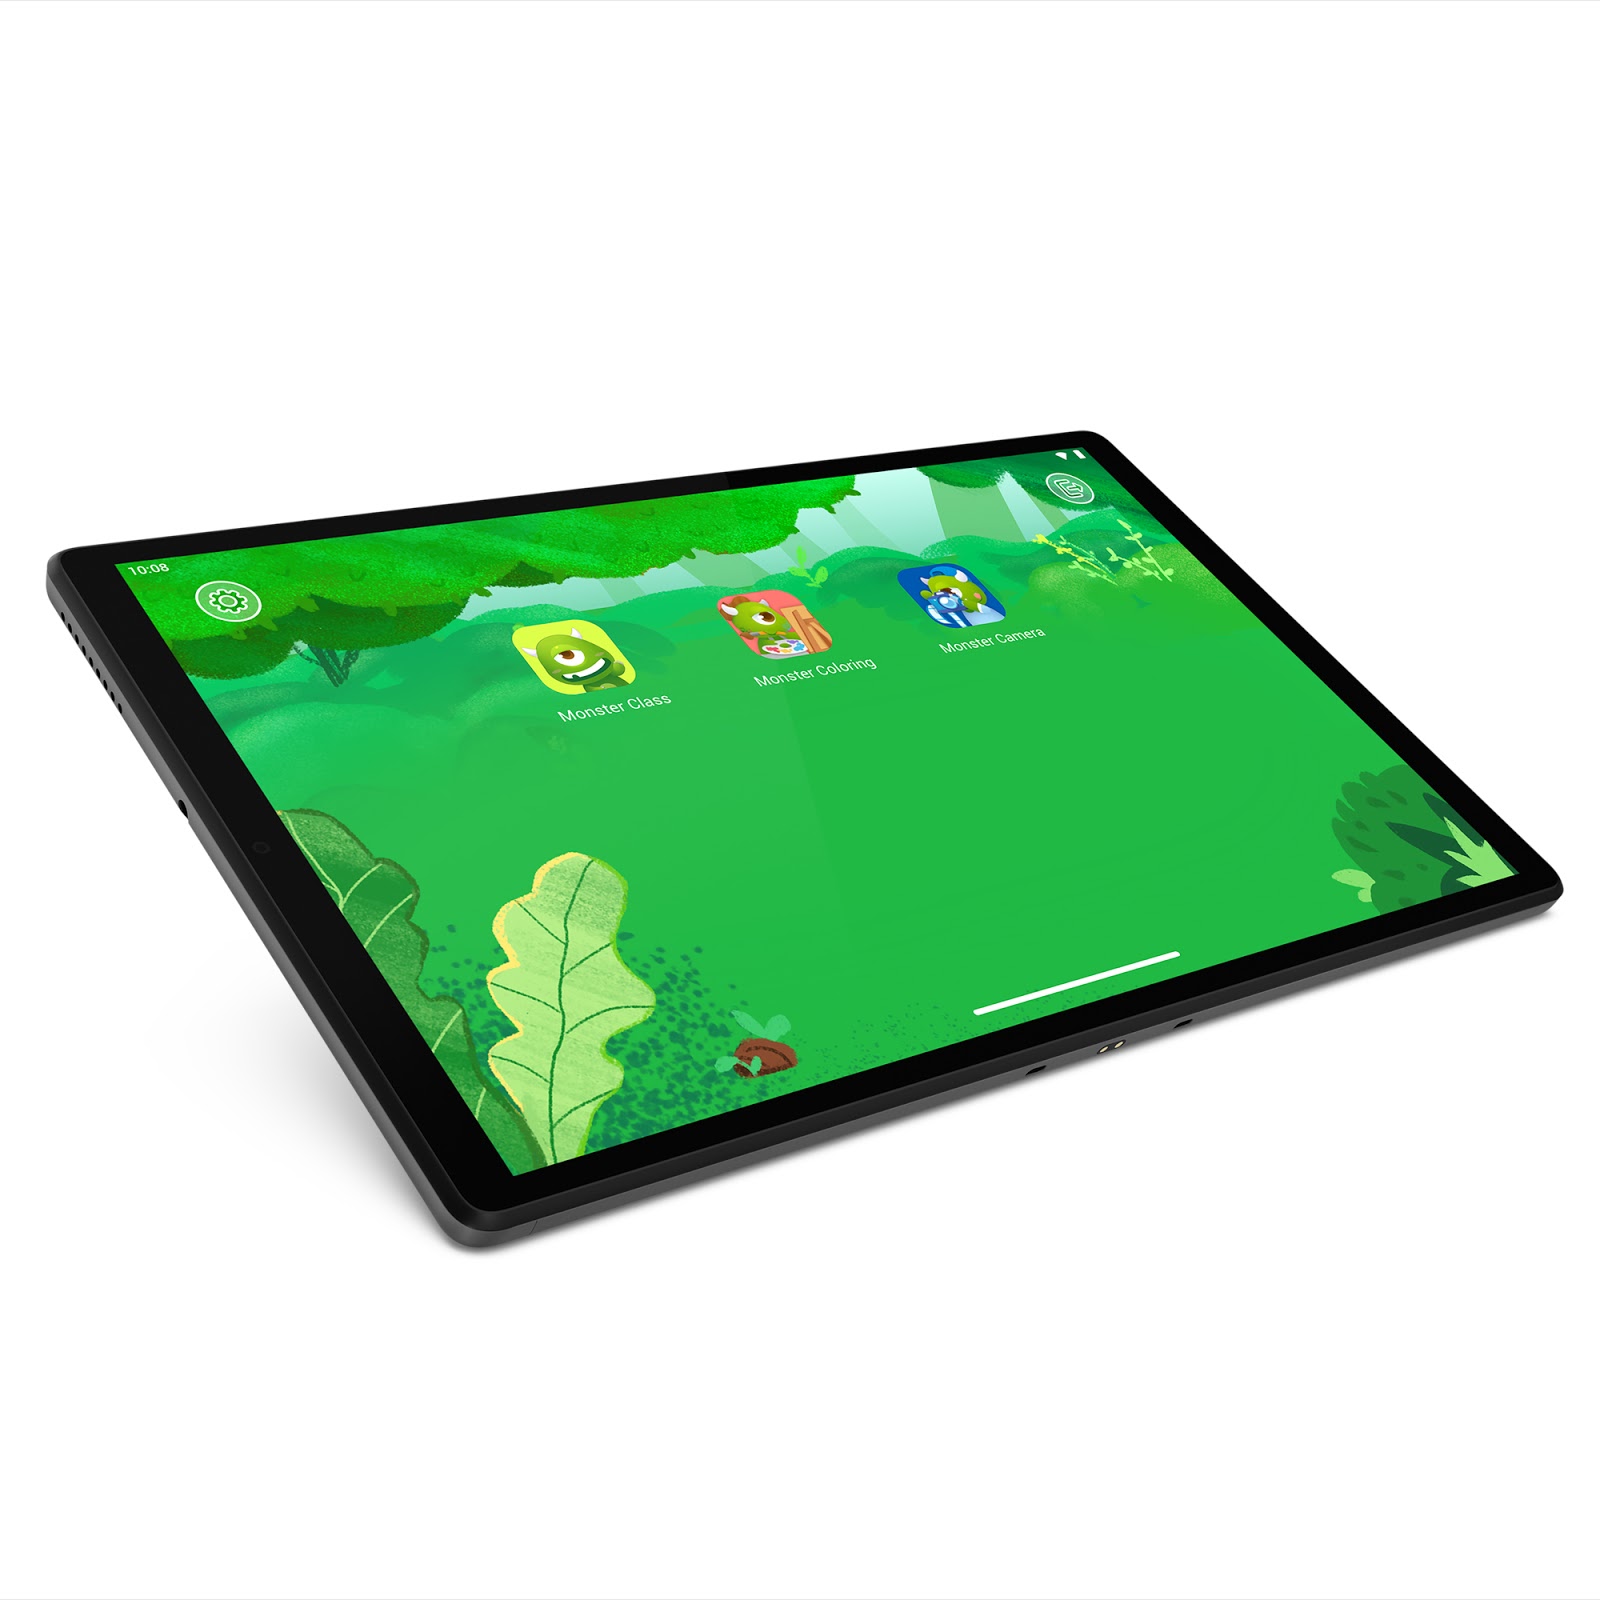 Lenovo Tab M10 FHD Plus 10.3" Tablet, 64GB Storage, 4GB Memory, 2.3GHz Octa-Core Processor, Android 9 Pie, FHD Display - image 4 of 4